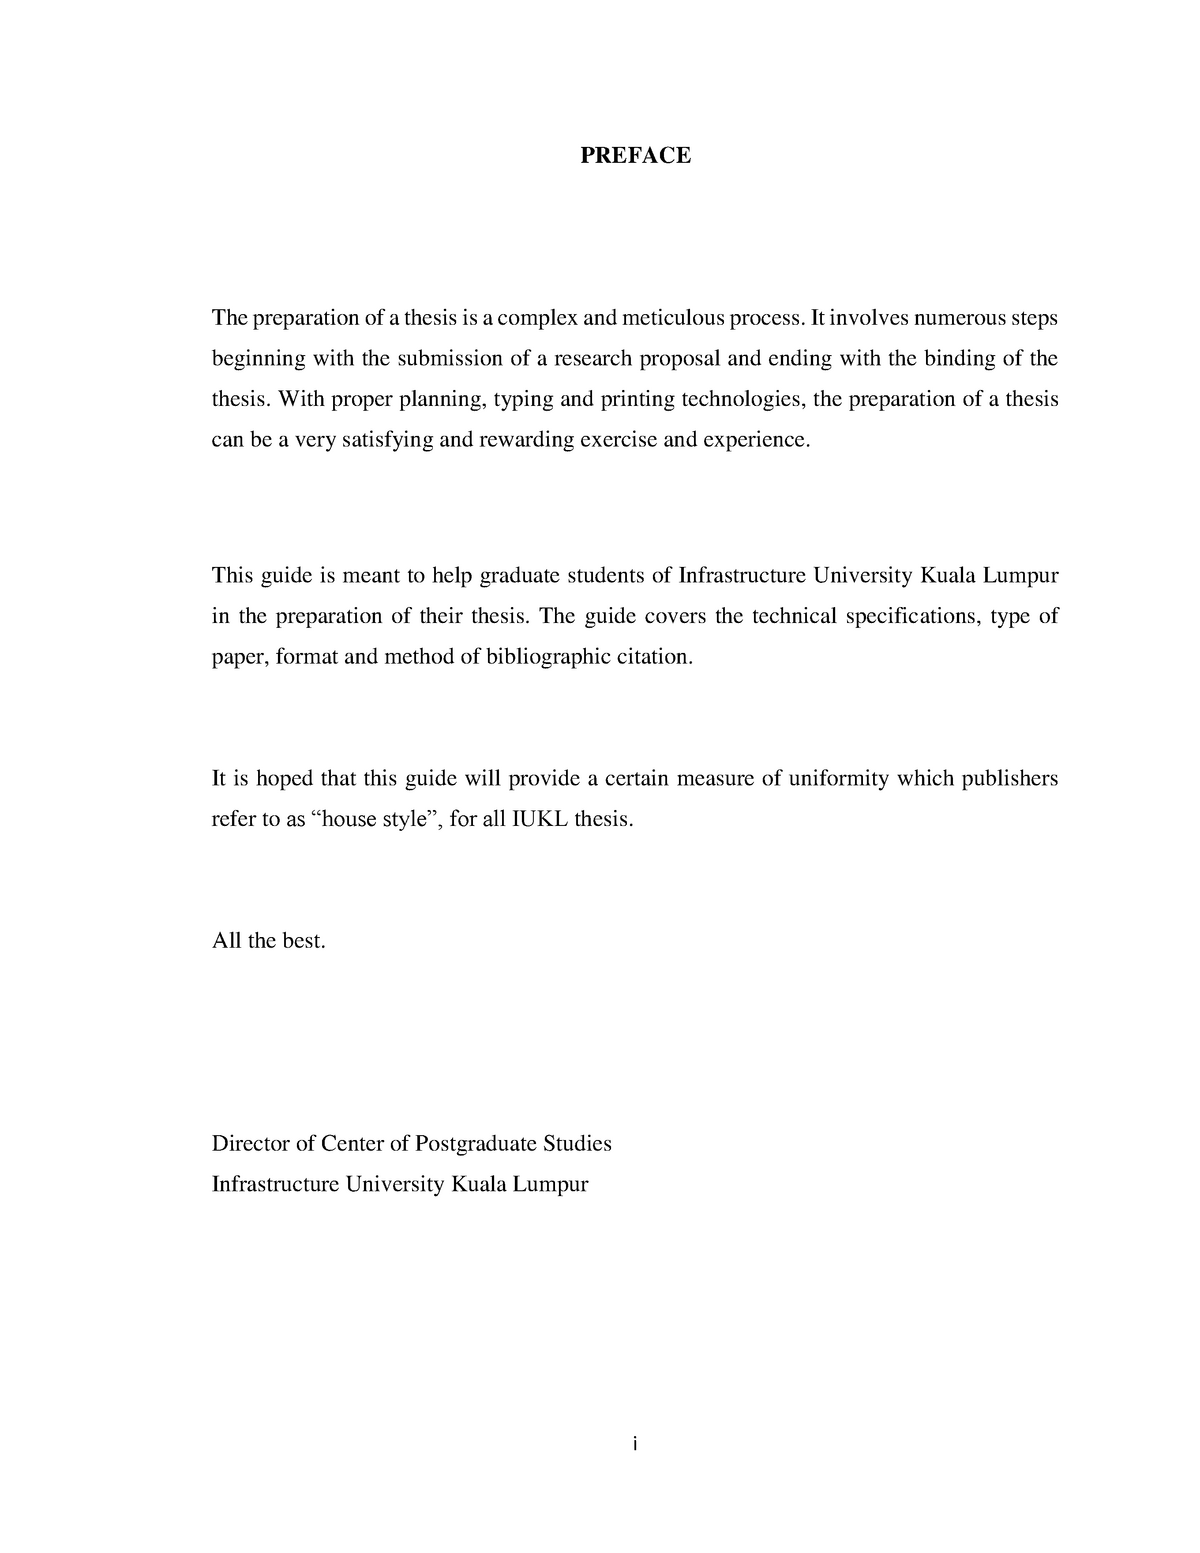 preface of thesis pdf